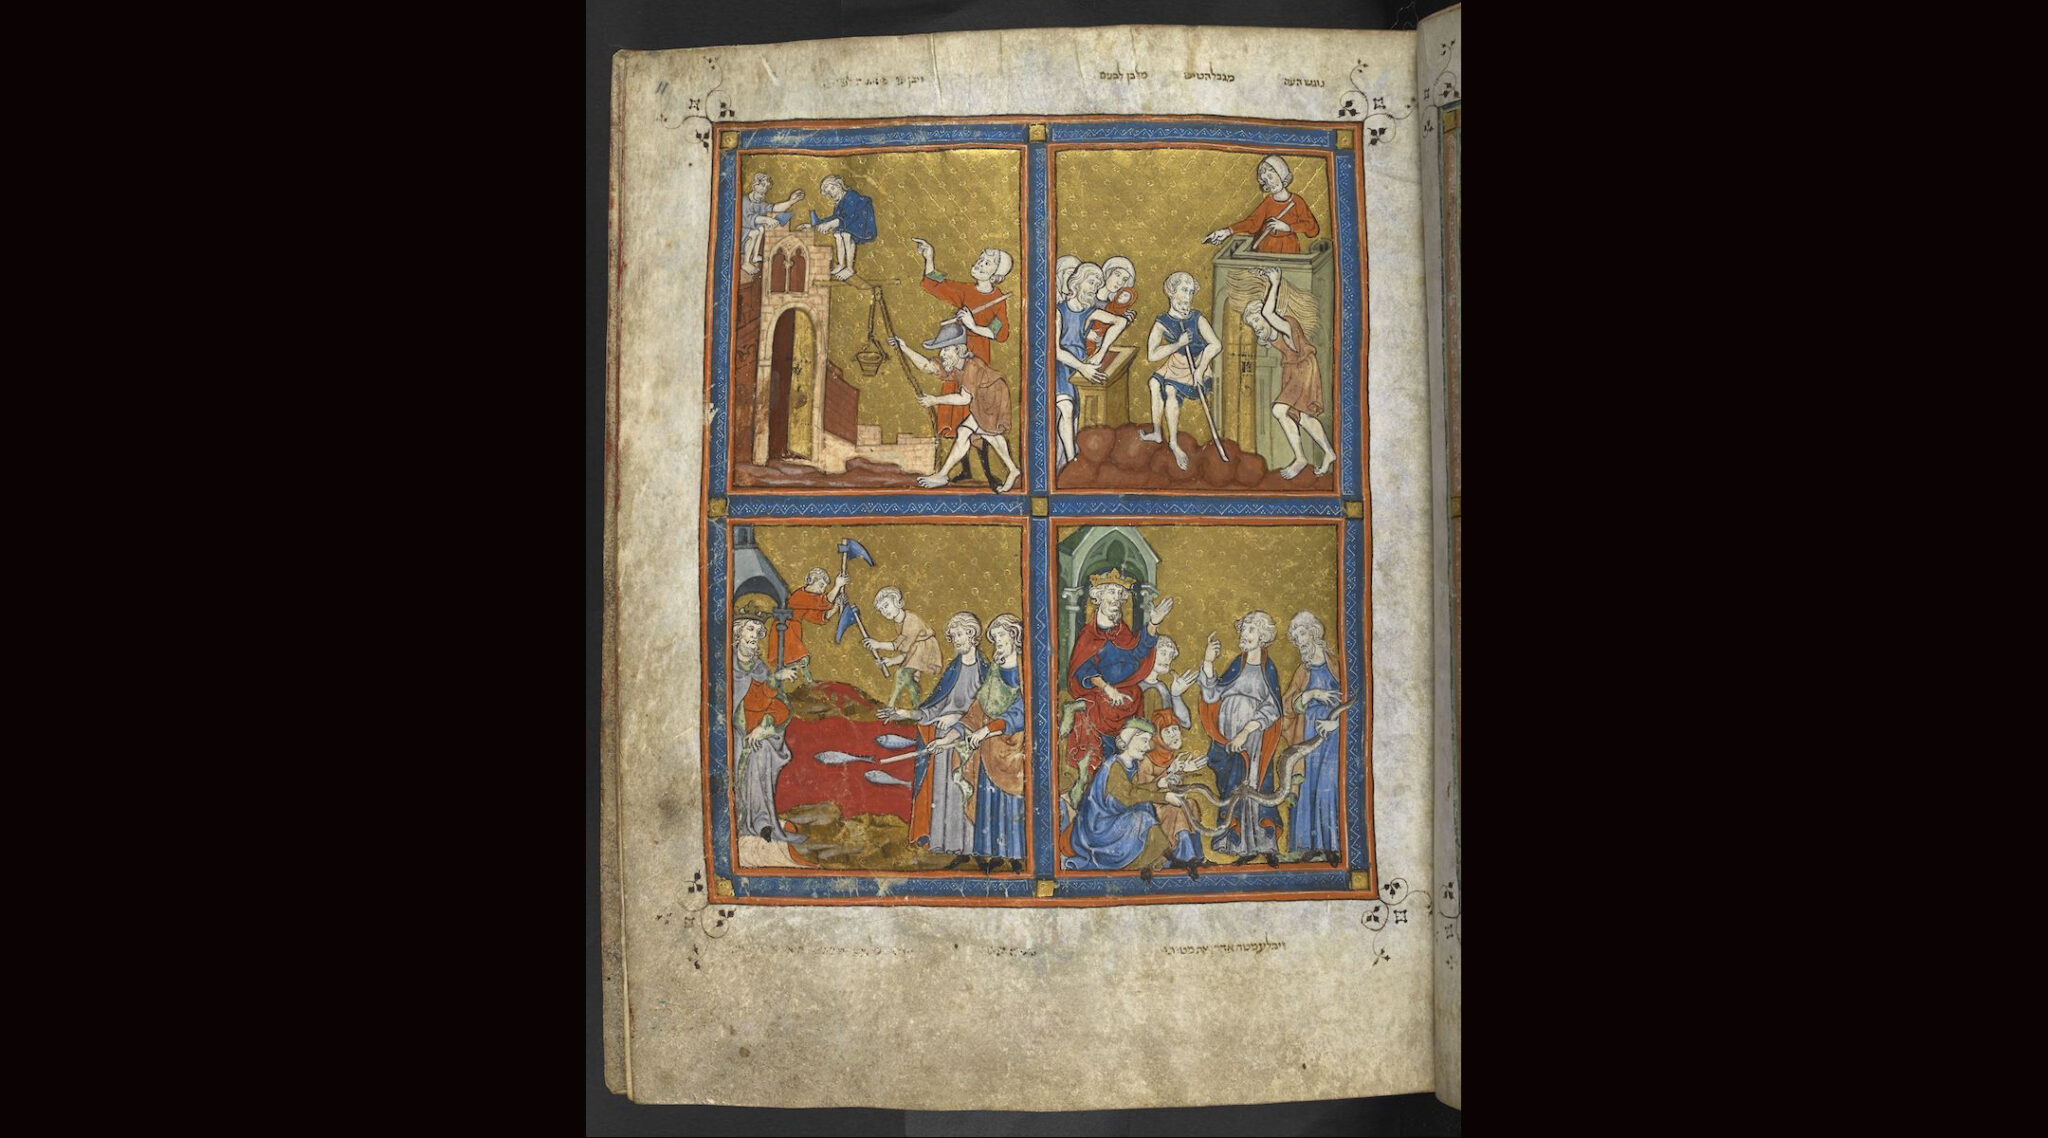 thanks-to-digitization-these-centuries-old-haggadahs-are-now-available